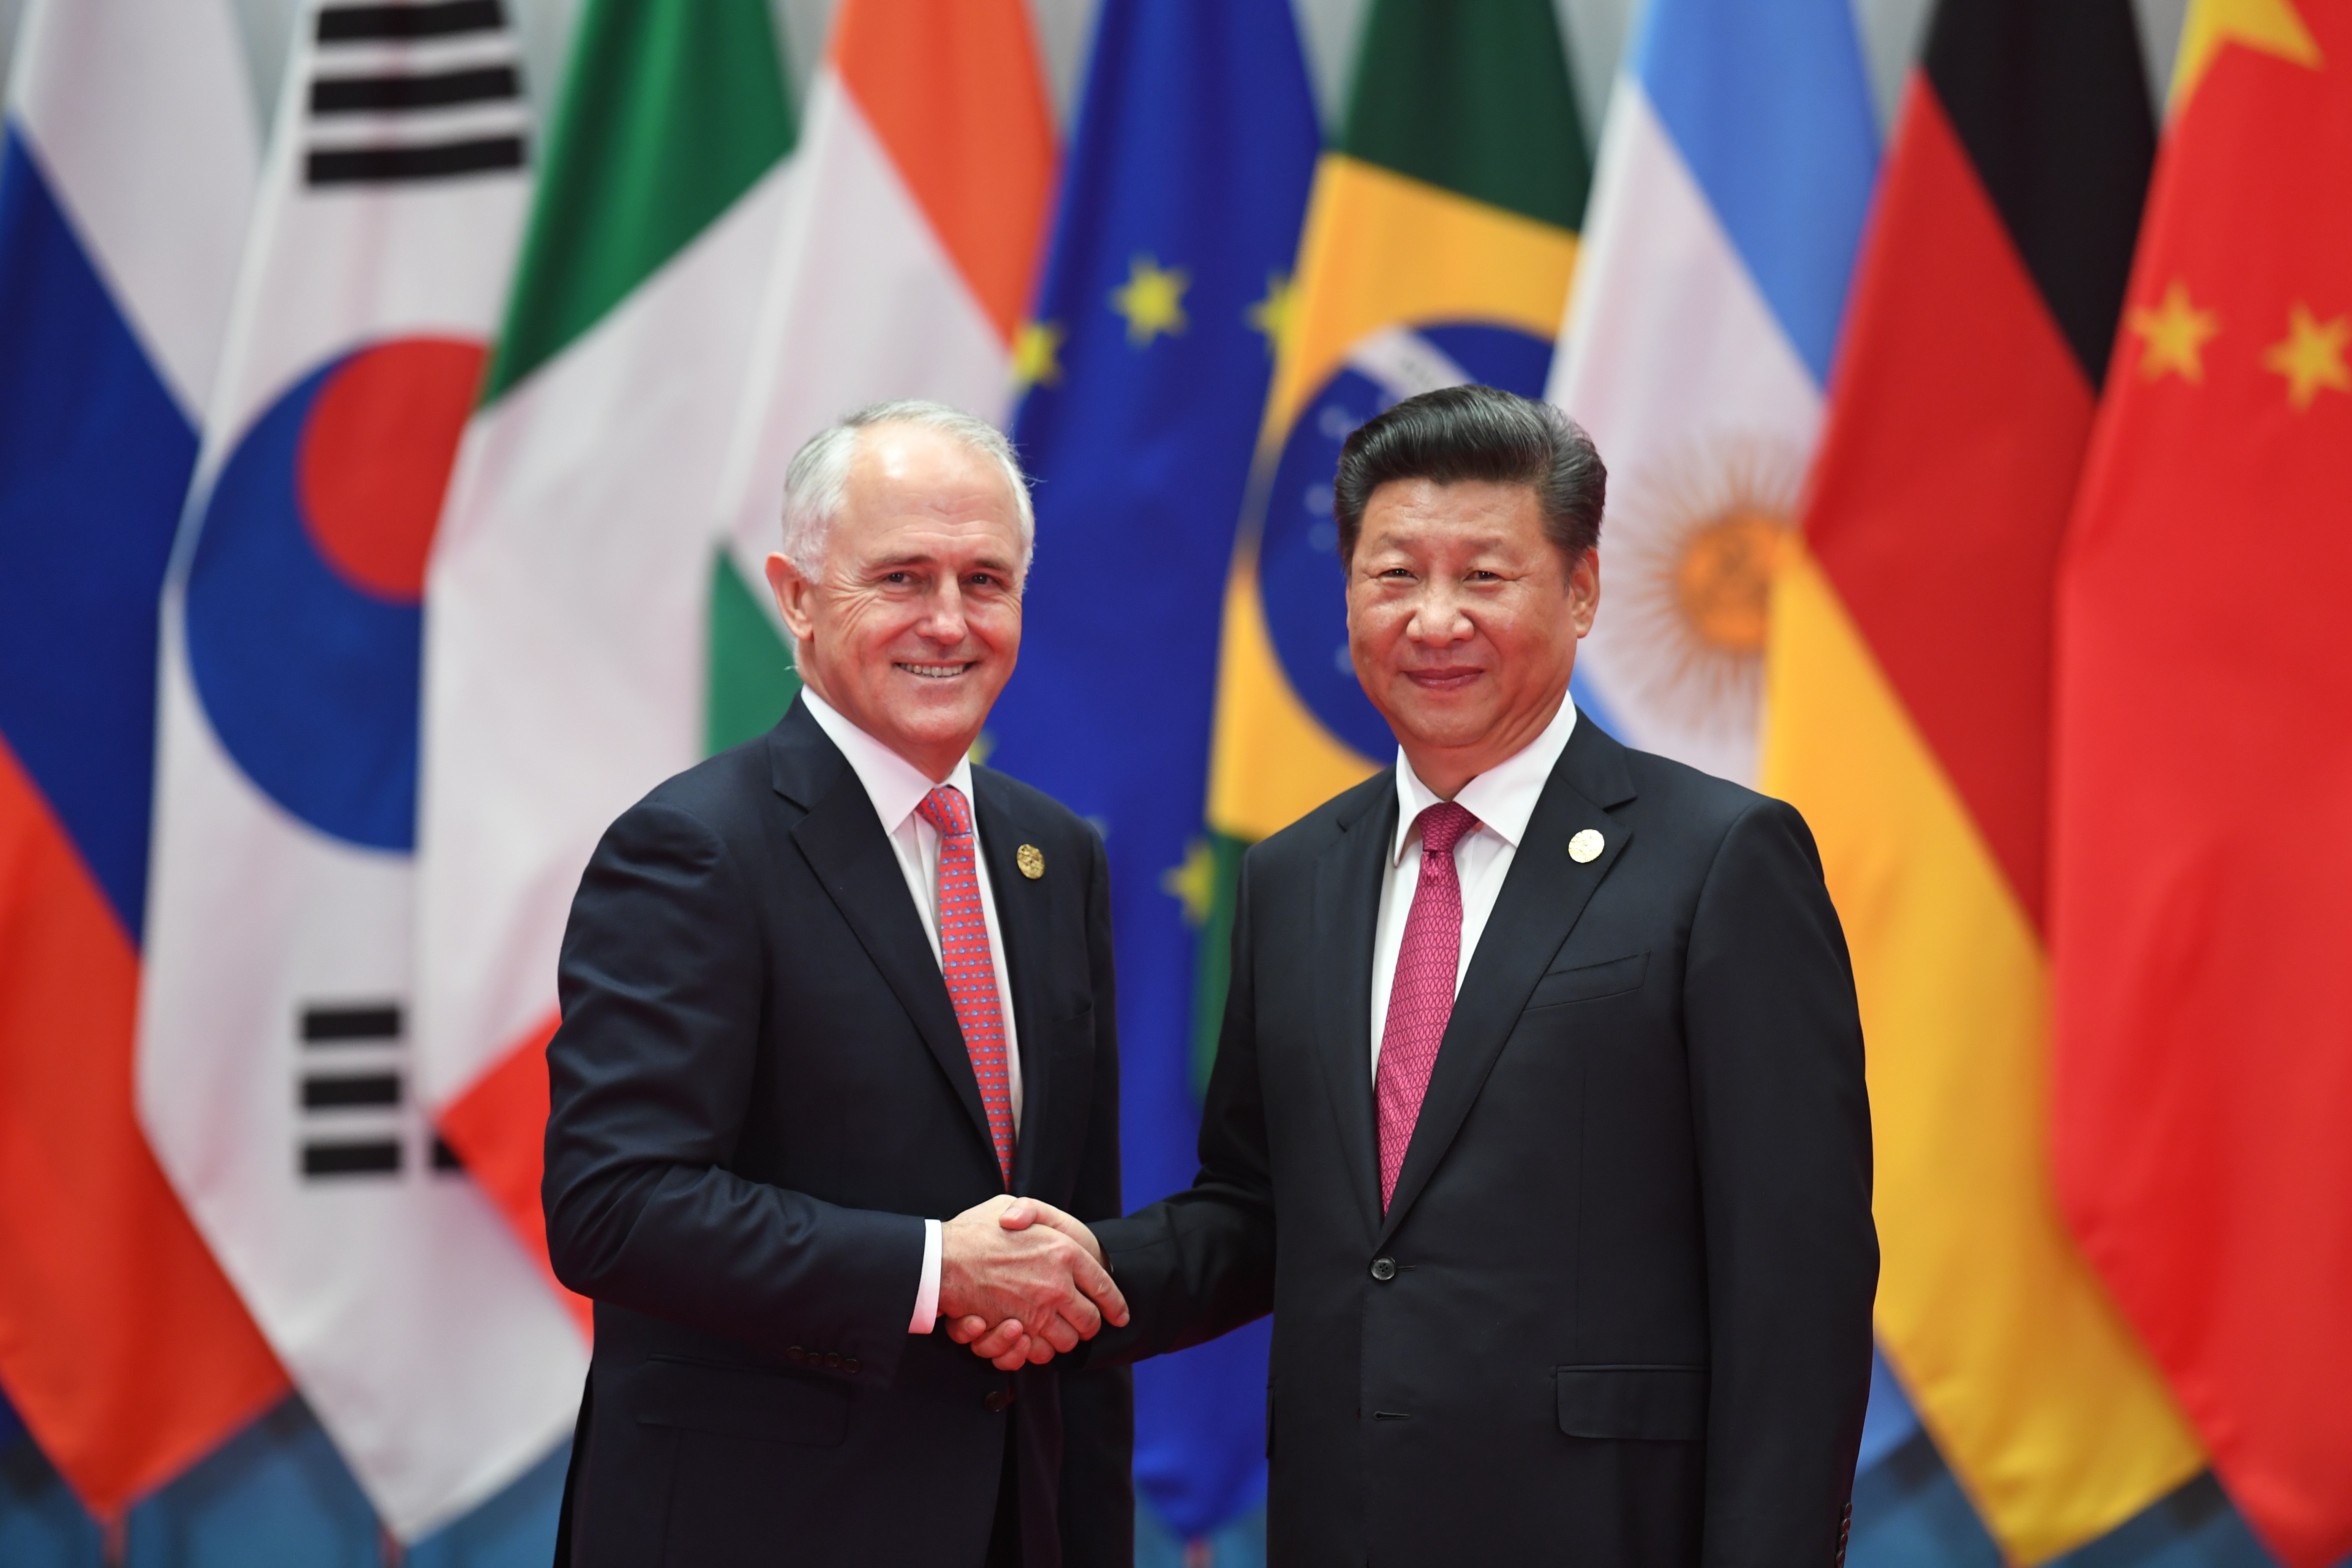 Australia's Prime Minister Malcolm Turnbull shakes hands with Chinese President Xi Jinping before the G20 leaders' family photo in Hangzhou, on September 4, 2016. Photo: AFP